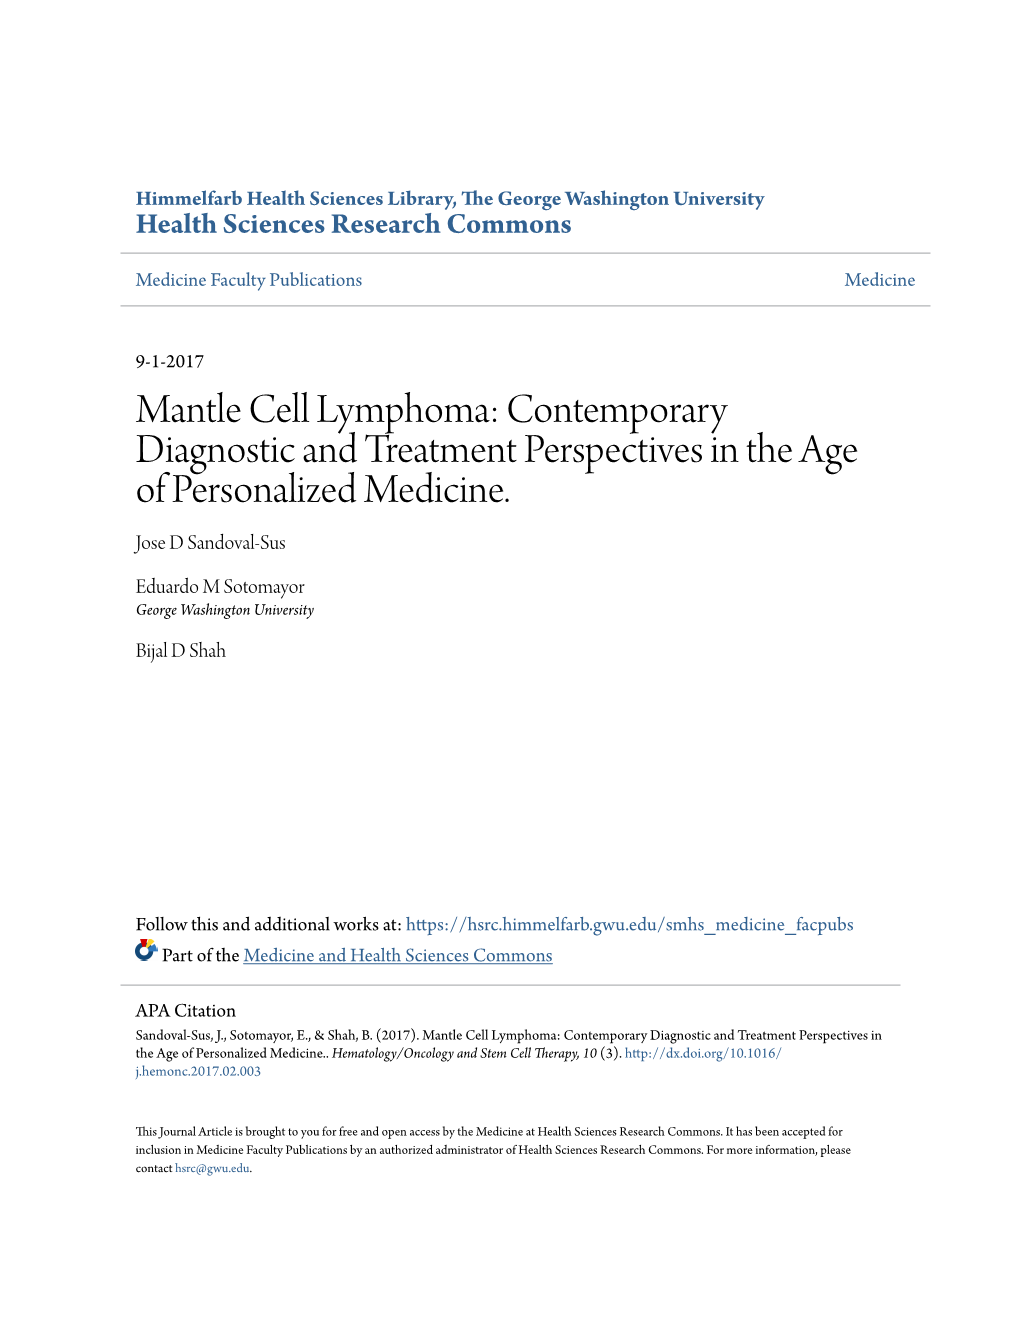 Mantle Cell Lymphoma: Contemporary Diagnostic and Treatment Perspectives in the Age of Personalized Medicine